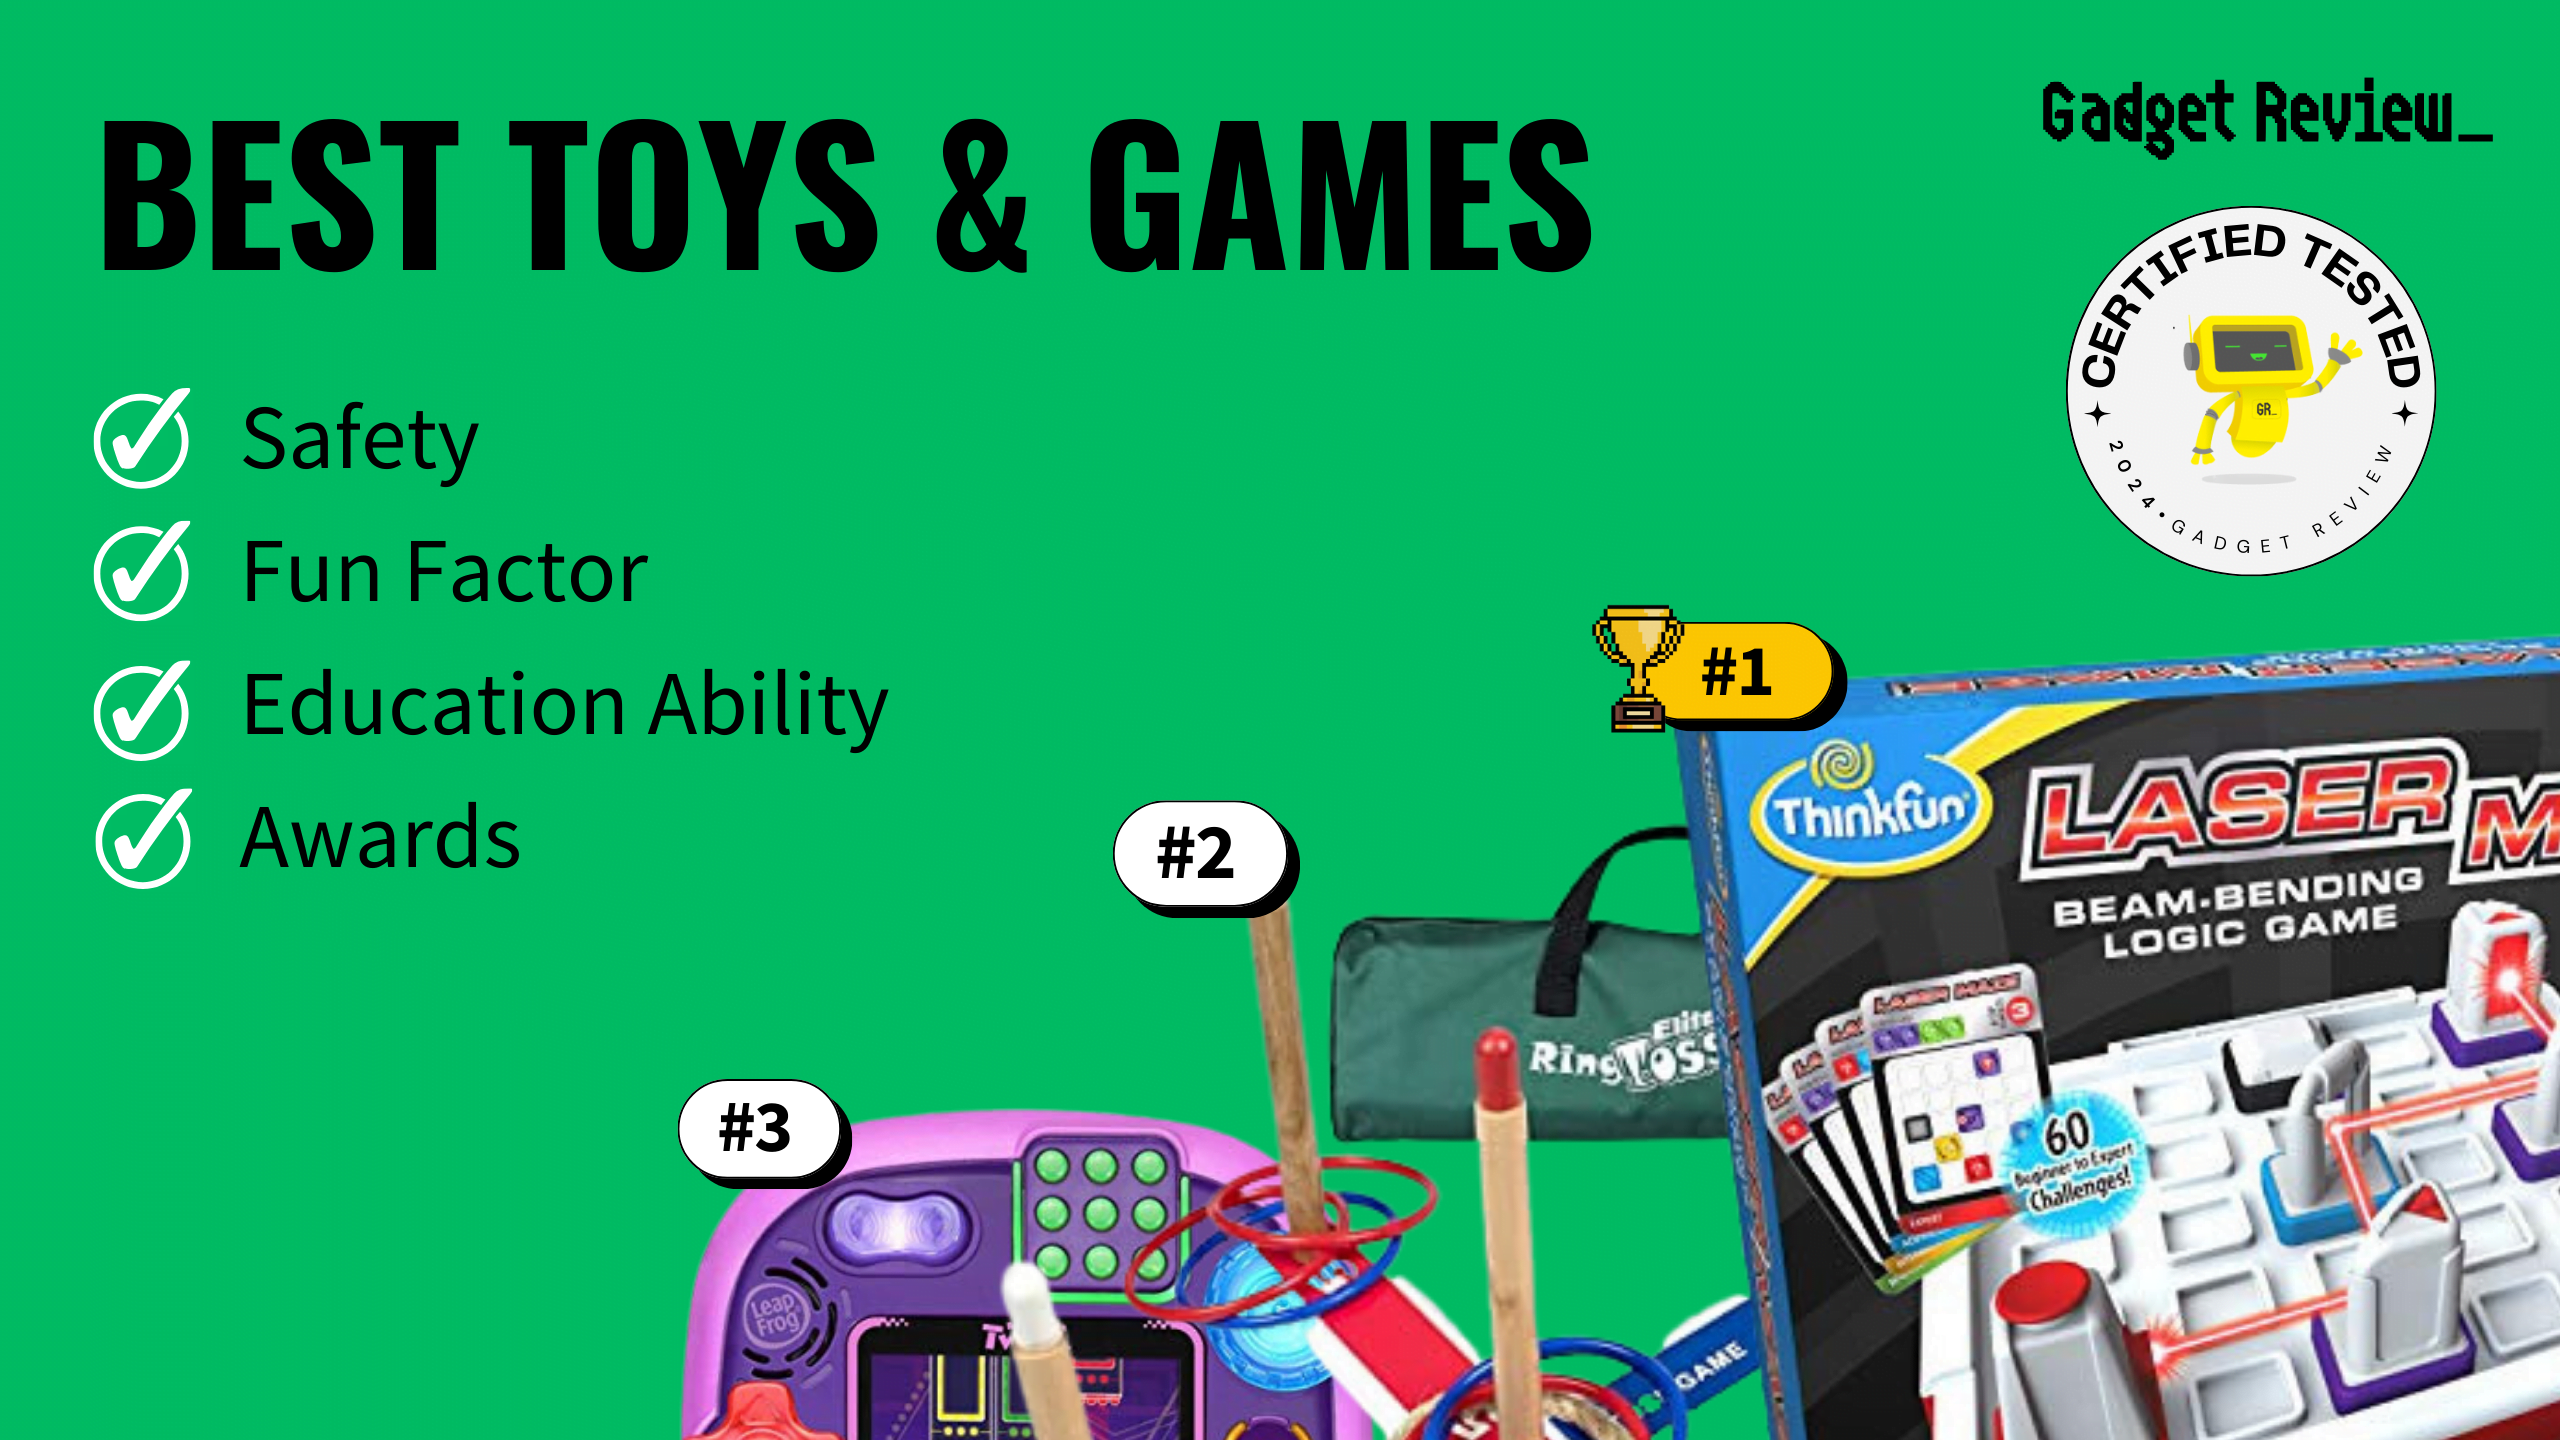 best toys games guide that shows the top best model